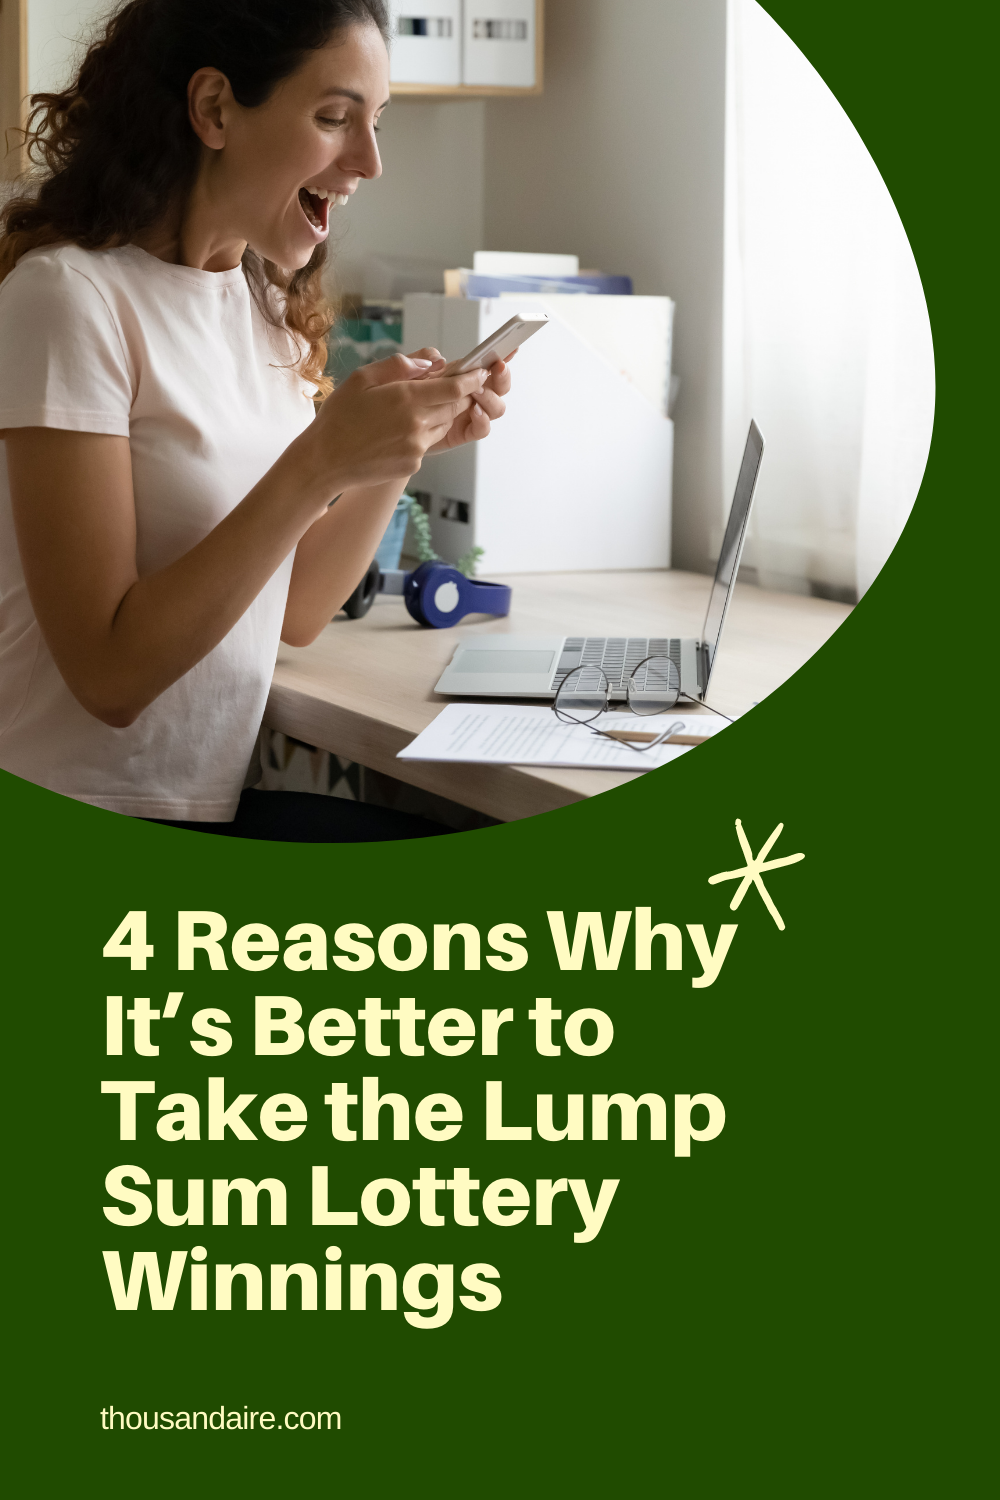 4 Reasons Why It’s Better to Take the Lump Sum Lottery Winnings